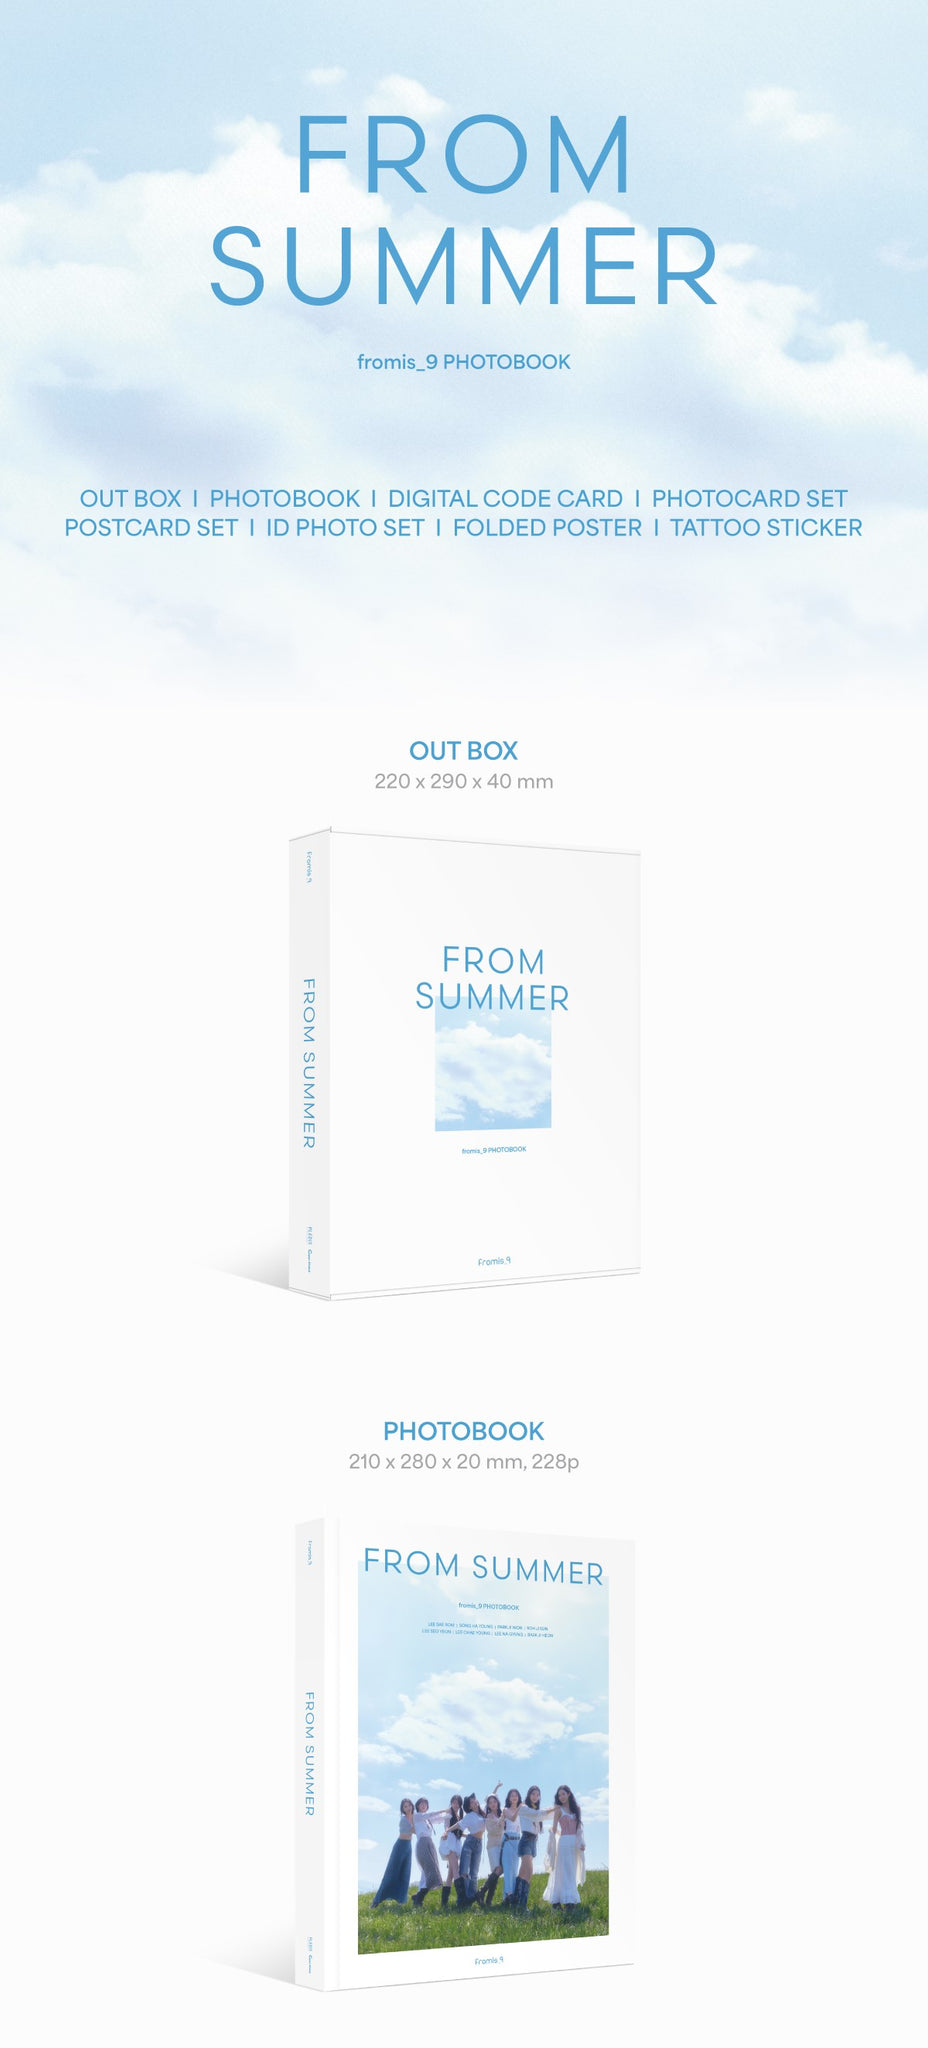 fromis_9 2024 PHOTOBOOK 'FROM SUMMER' Inclusions: Out Box, Photobook